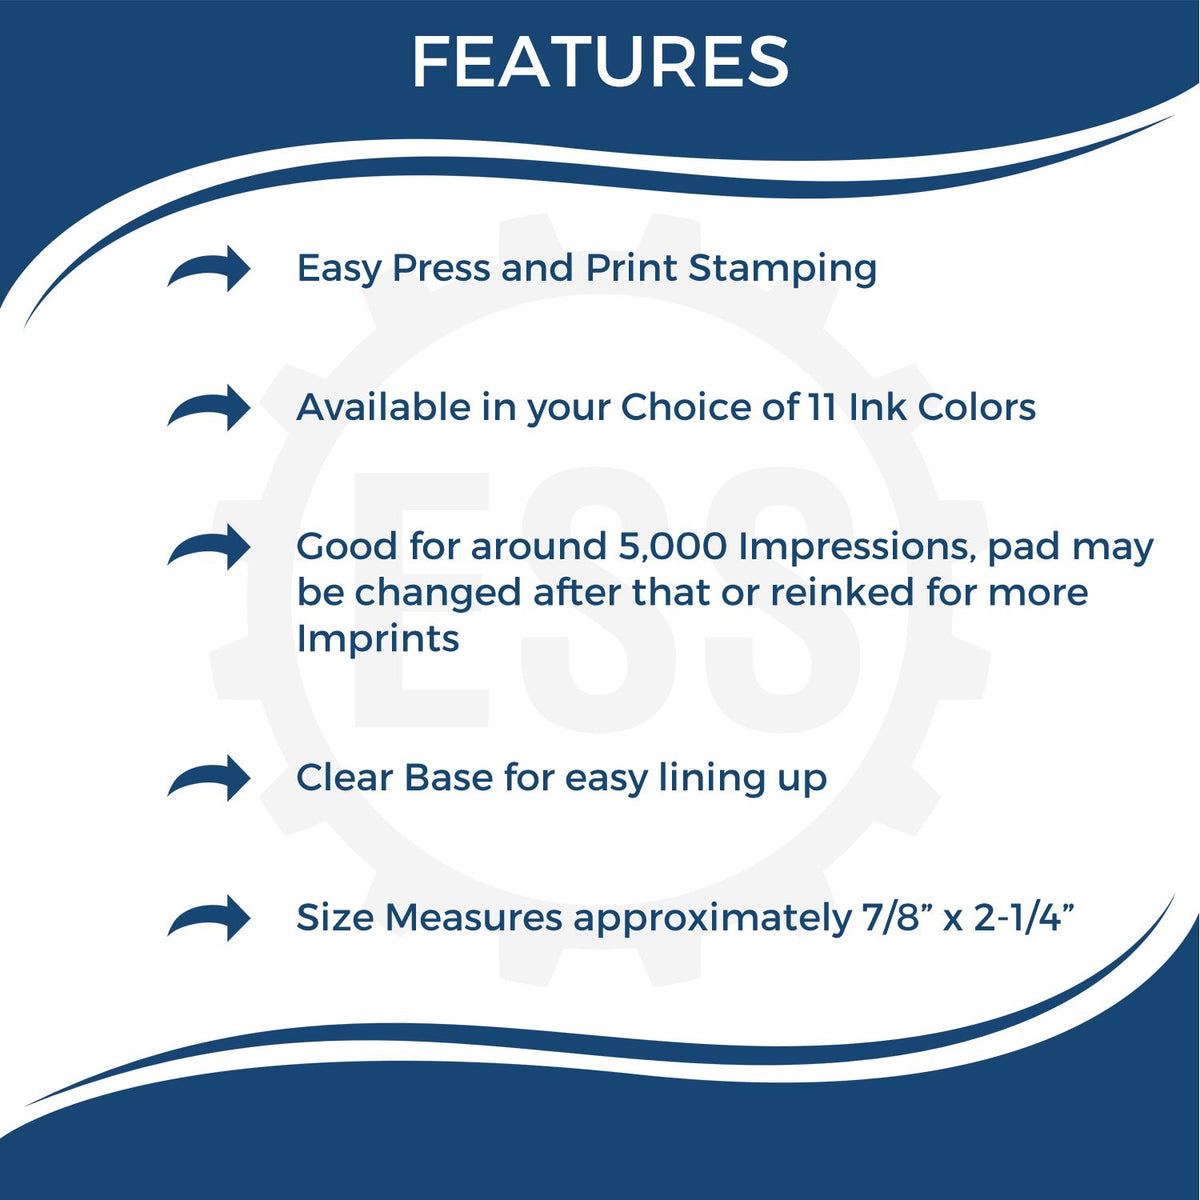 Large Self Inking Faxed Stamp